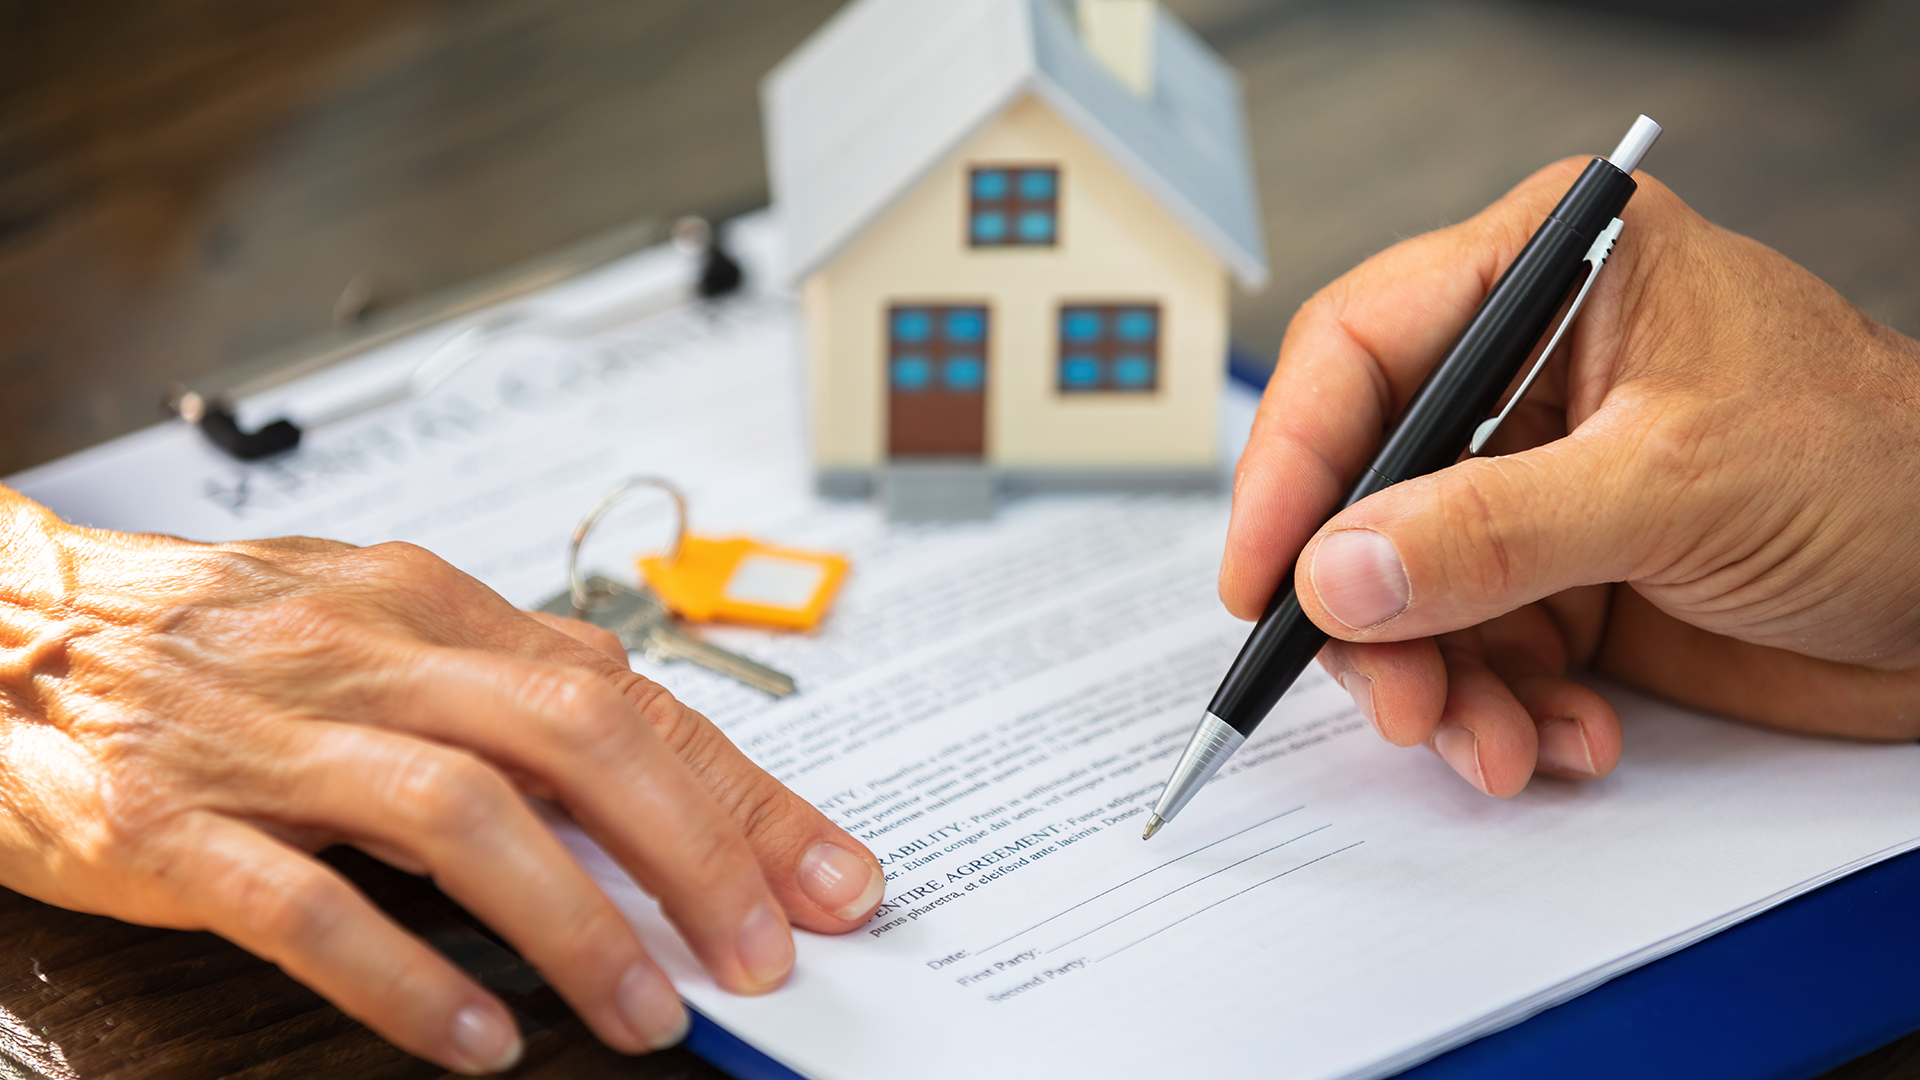 A person signing a deed or contract for a home.